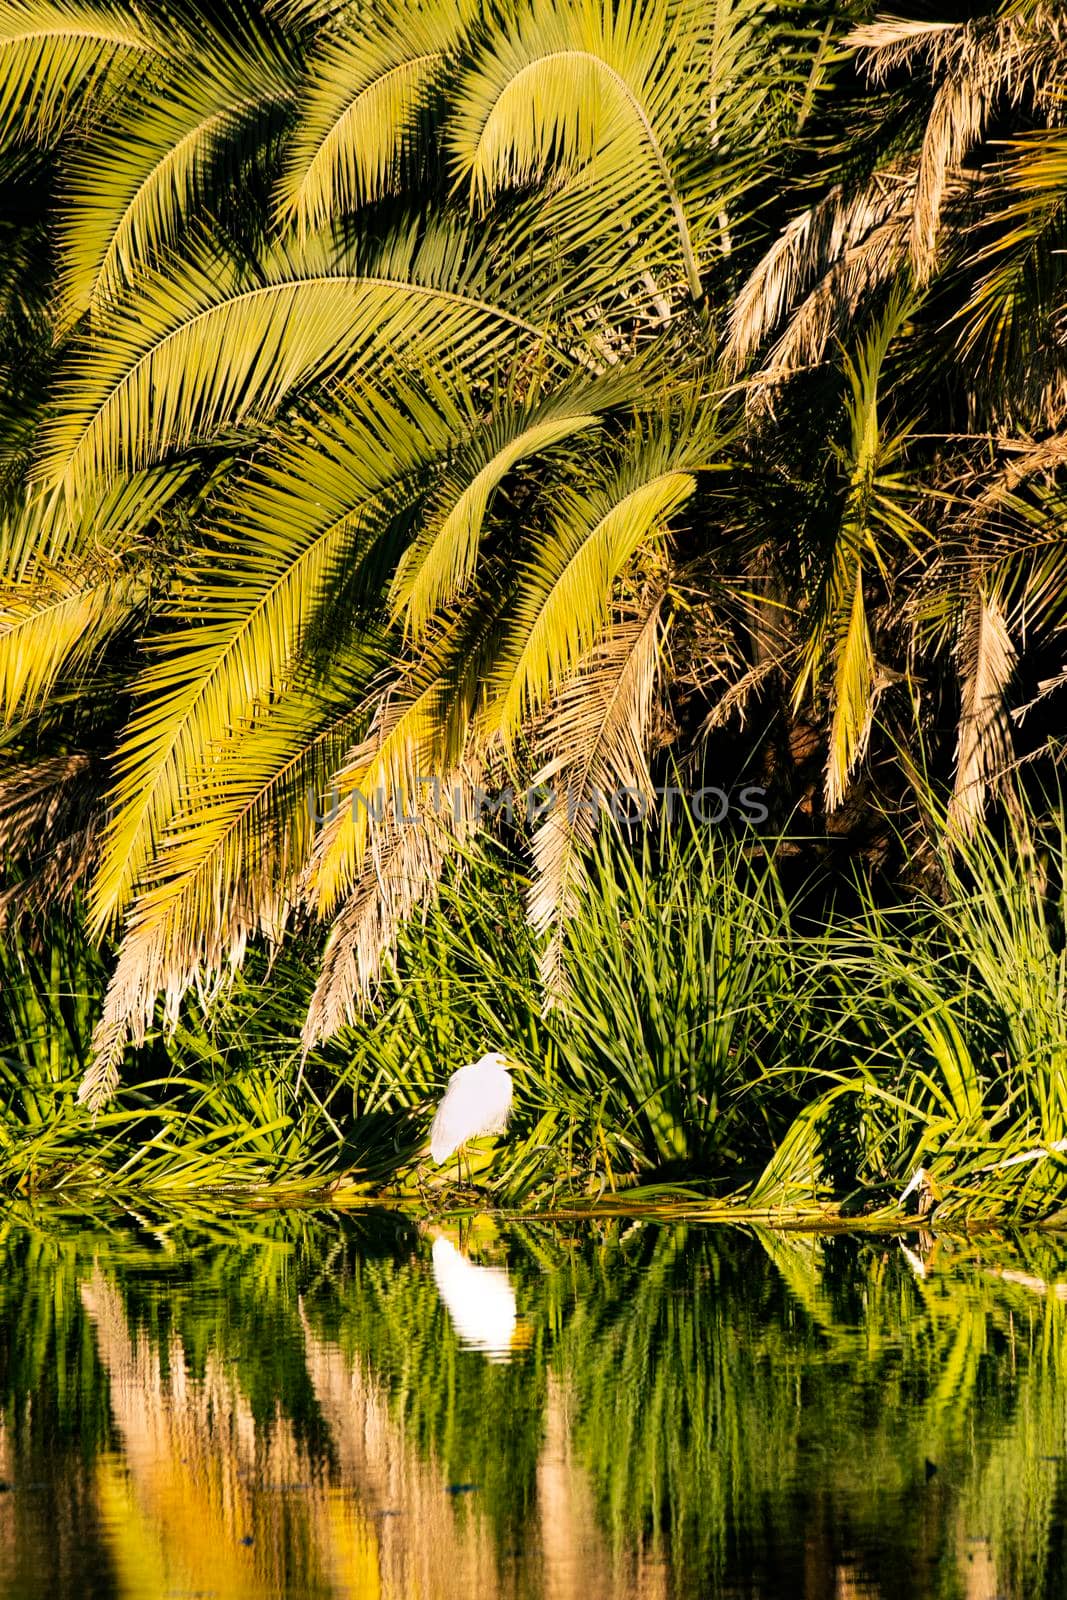 White stork reflected in water with green palm trees on an island by StefanMal